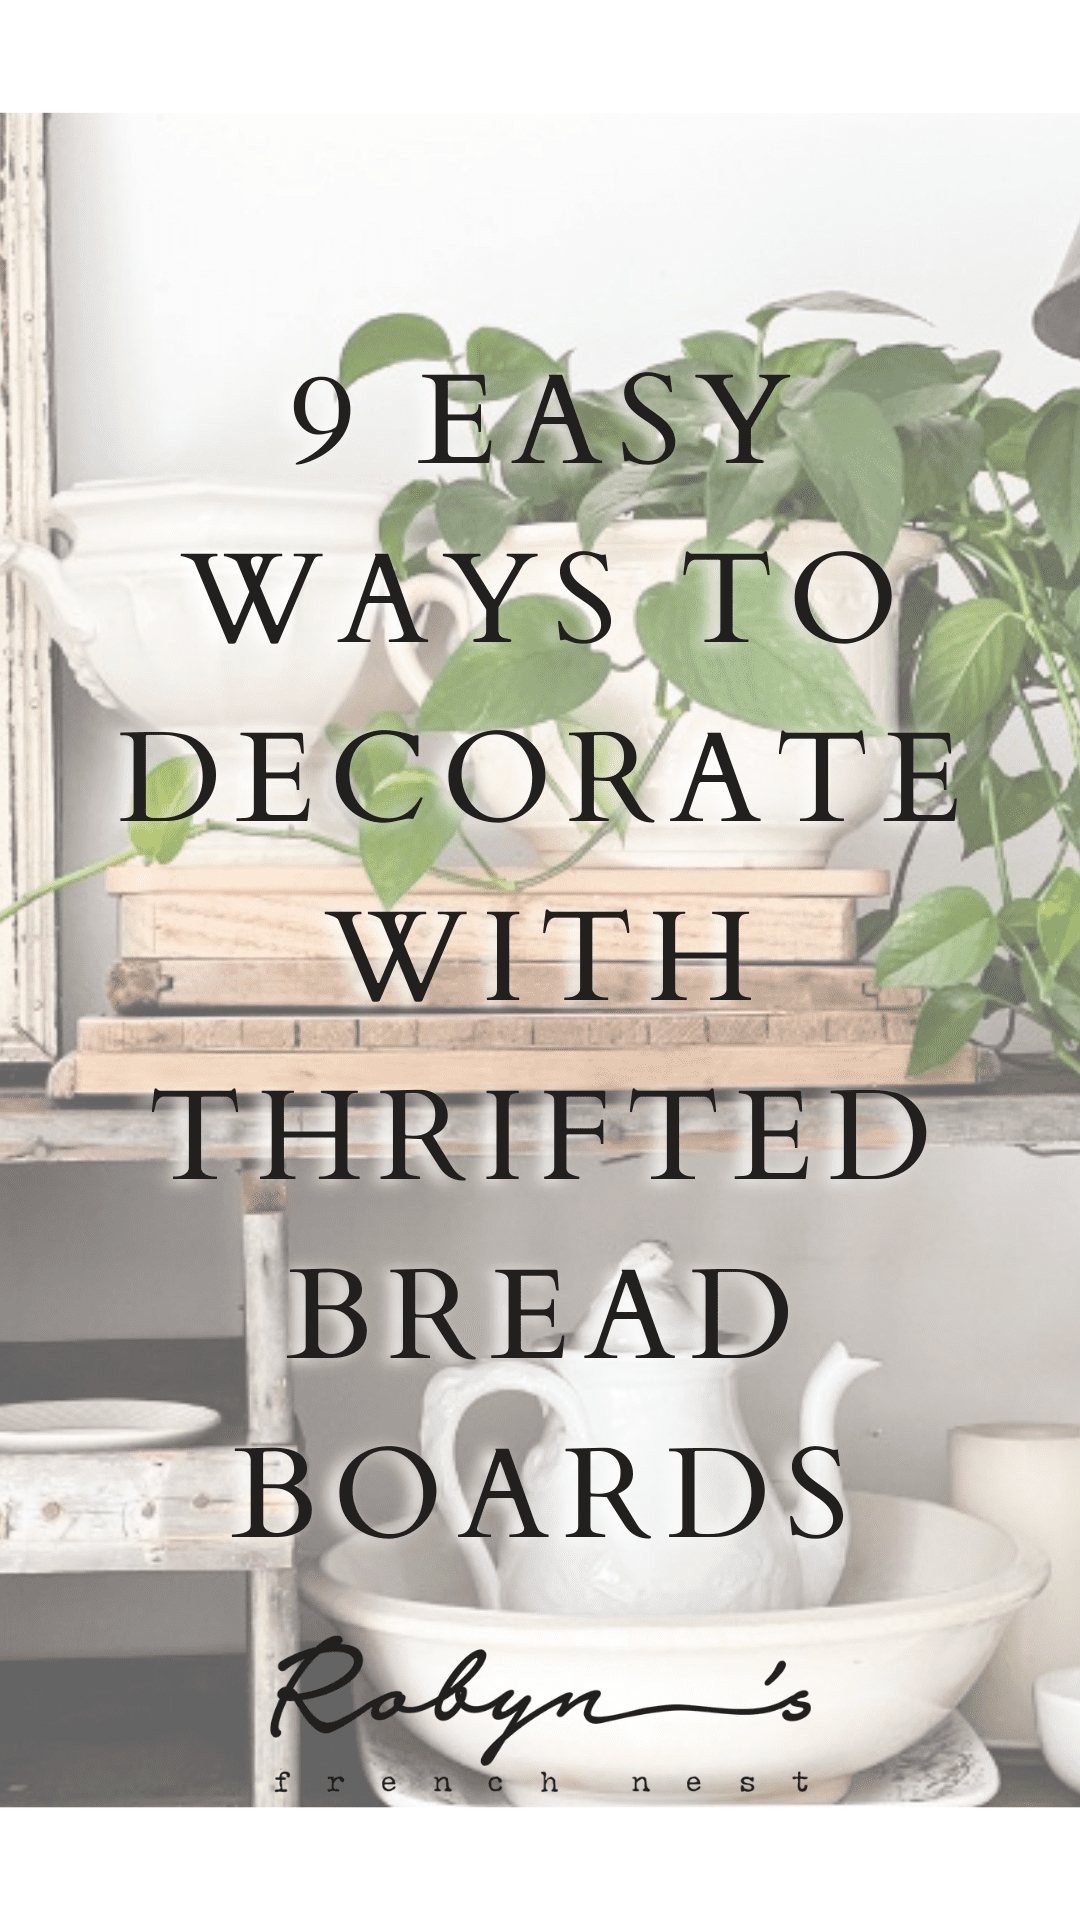 https://robynsfrenchnest.com/wp-content/uploads/2022/03/9-Easy-Ways-to-Decorate-with-Thrifted-Bread-Boards.png